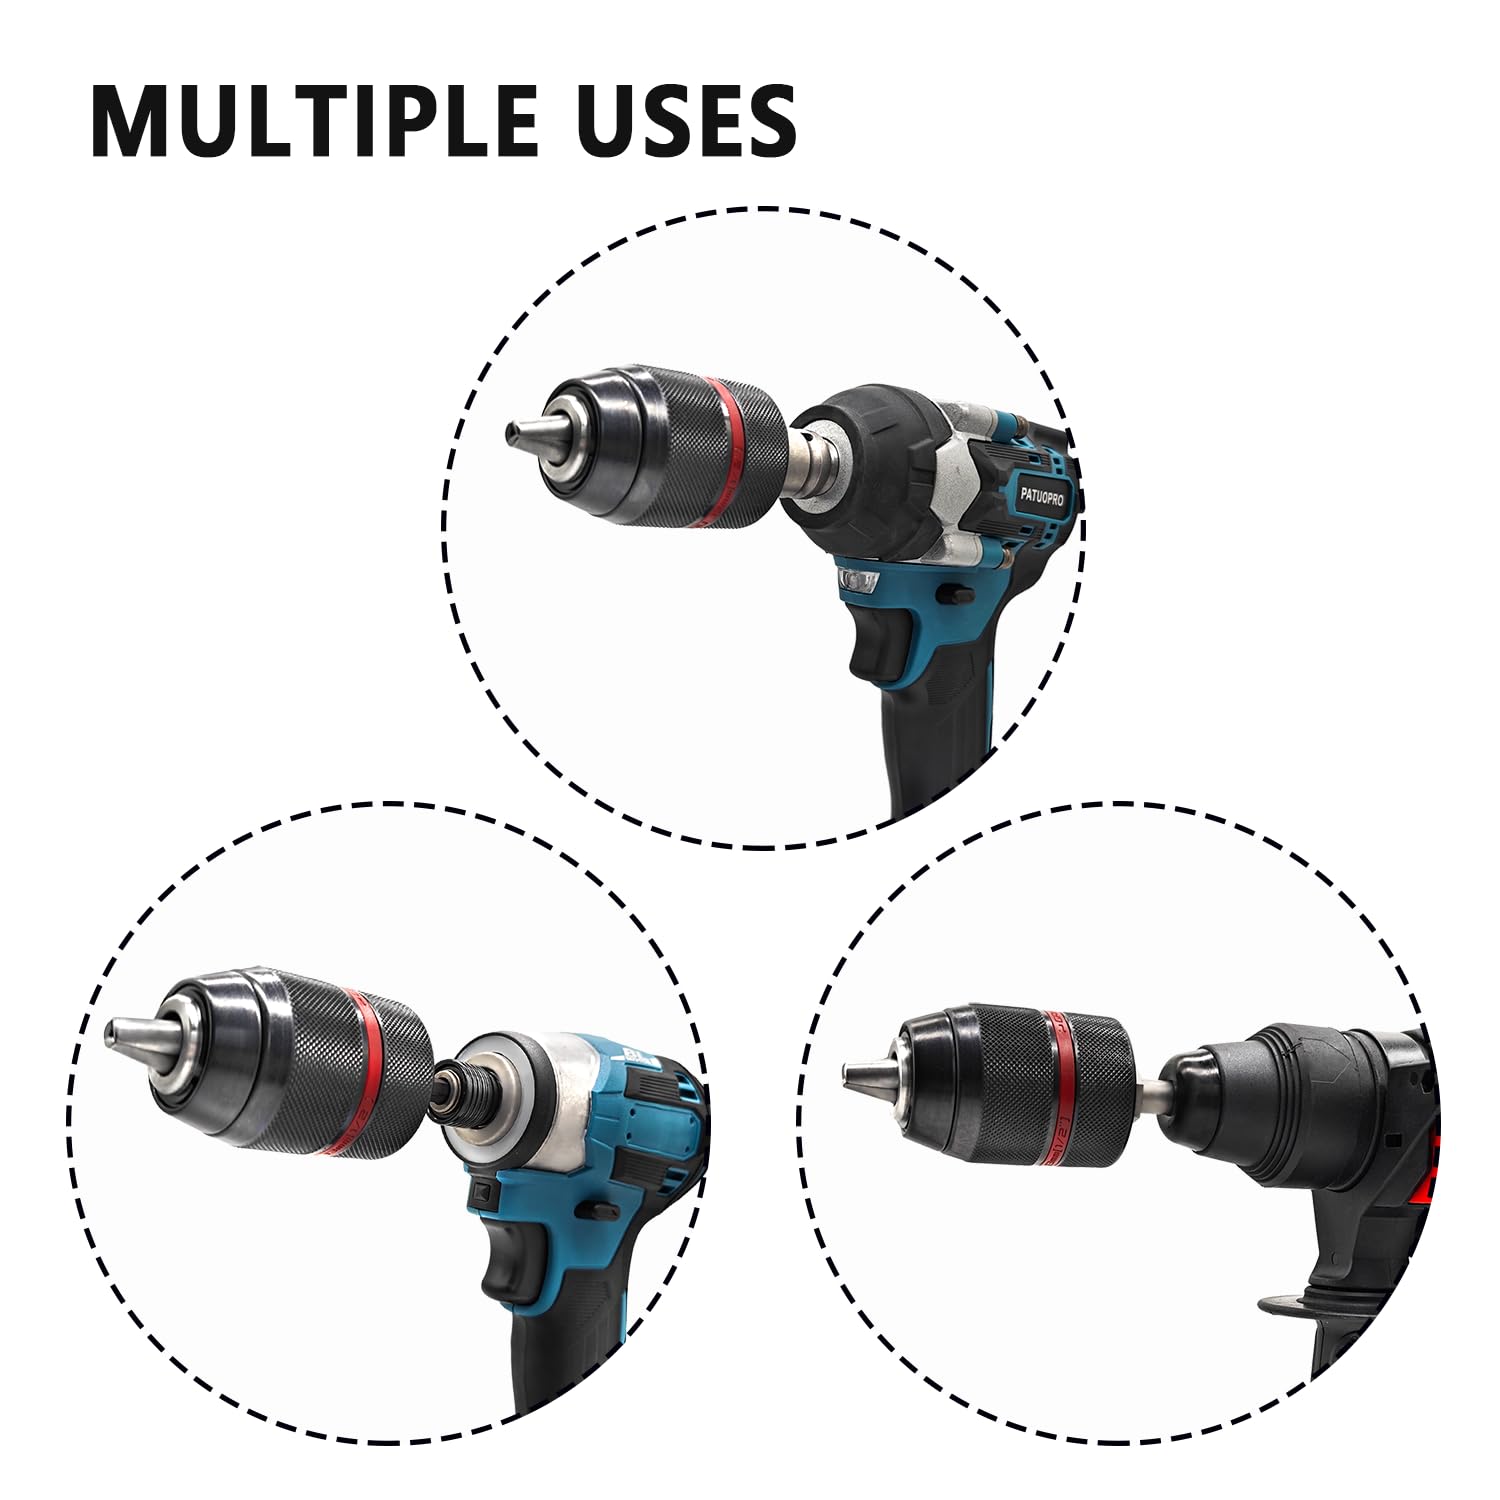 PATUOPRO 1.5-13mm Keyless Drill Chuck Metal Heavy Duty 1/2''-20UNF with SDS-Plus Shank 1/4" Hex Shank 1/2'' Socket Square Wrench Adapter for Impact Driver, Electric Drill, Hammer Drill